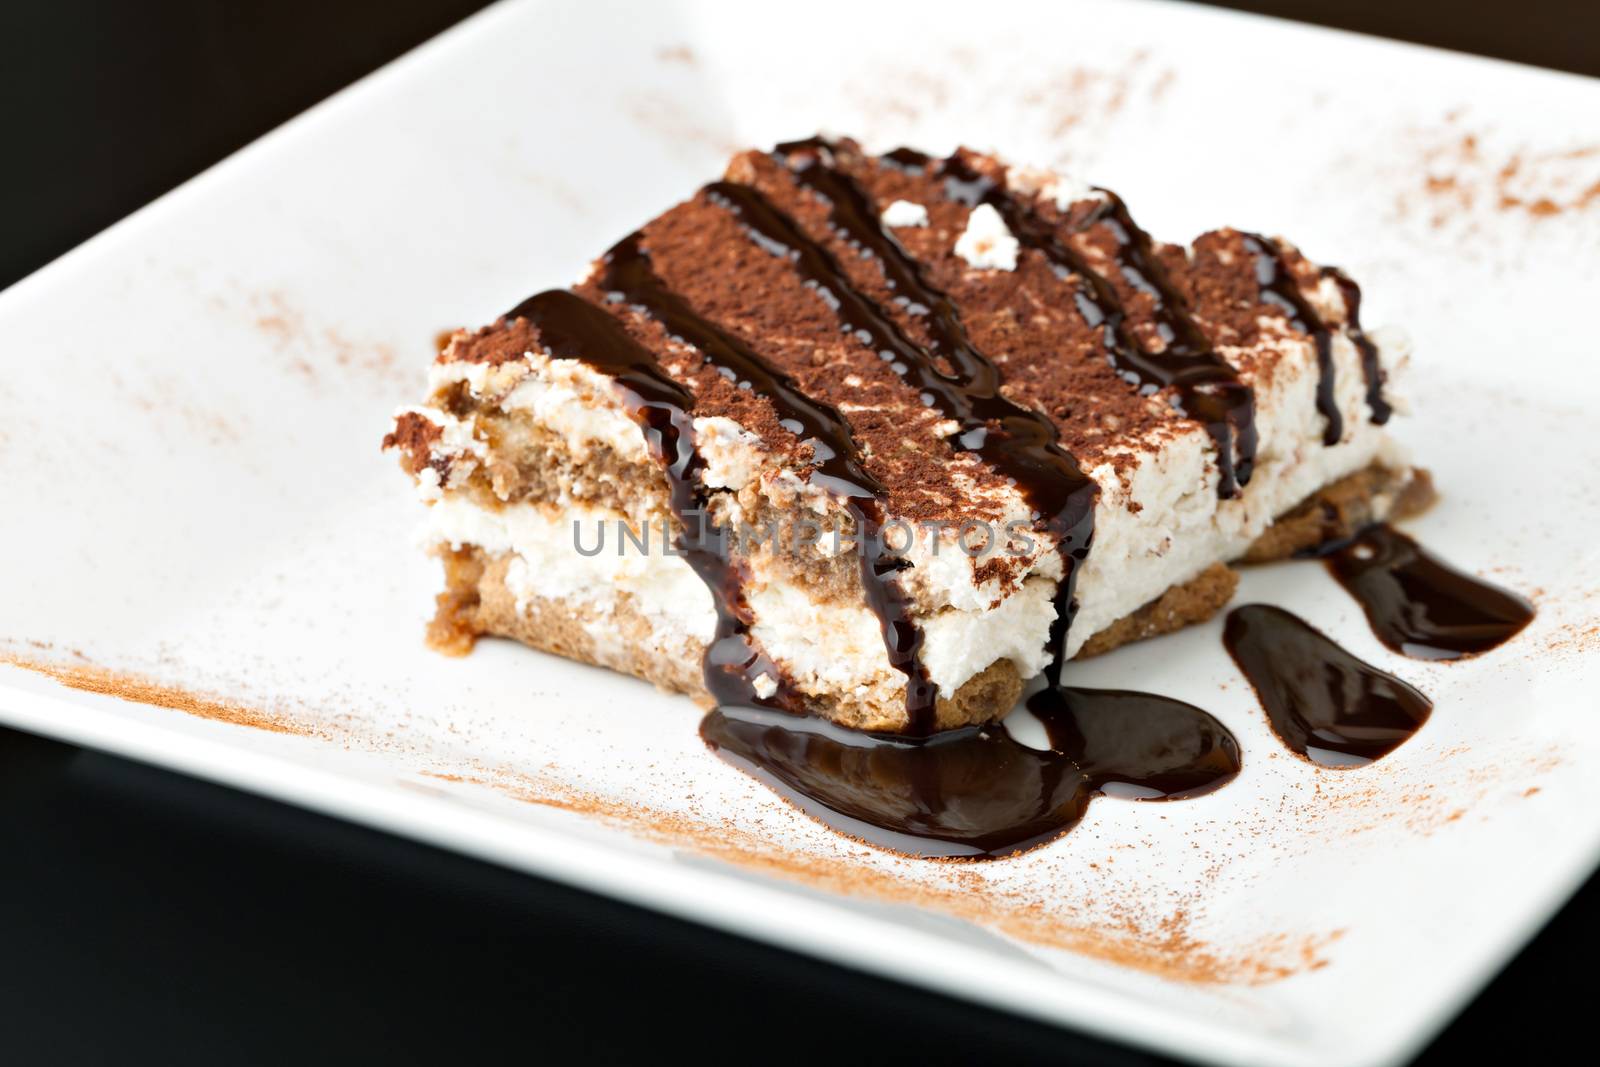 Slice of delicious tirimisu cake on a white plate garnished with cocoa power and drizzled chocolate sauce.